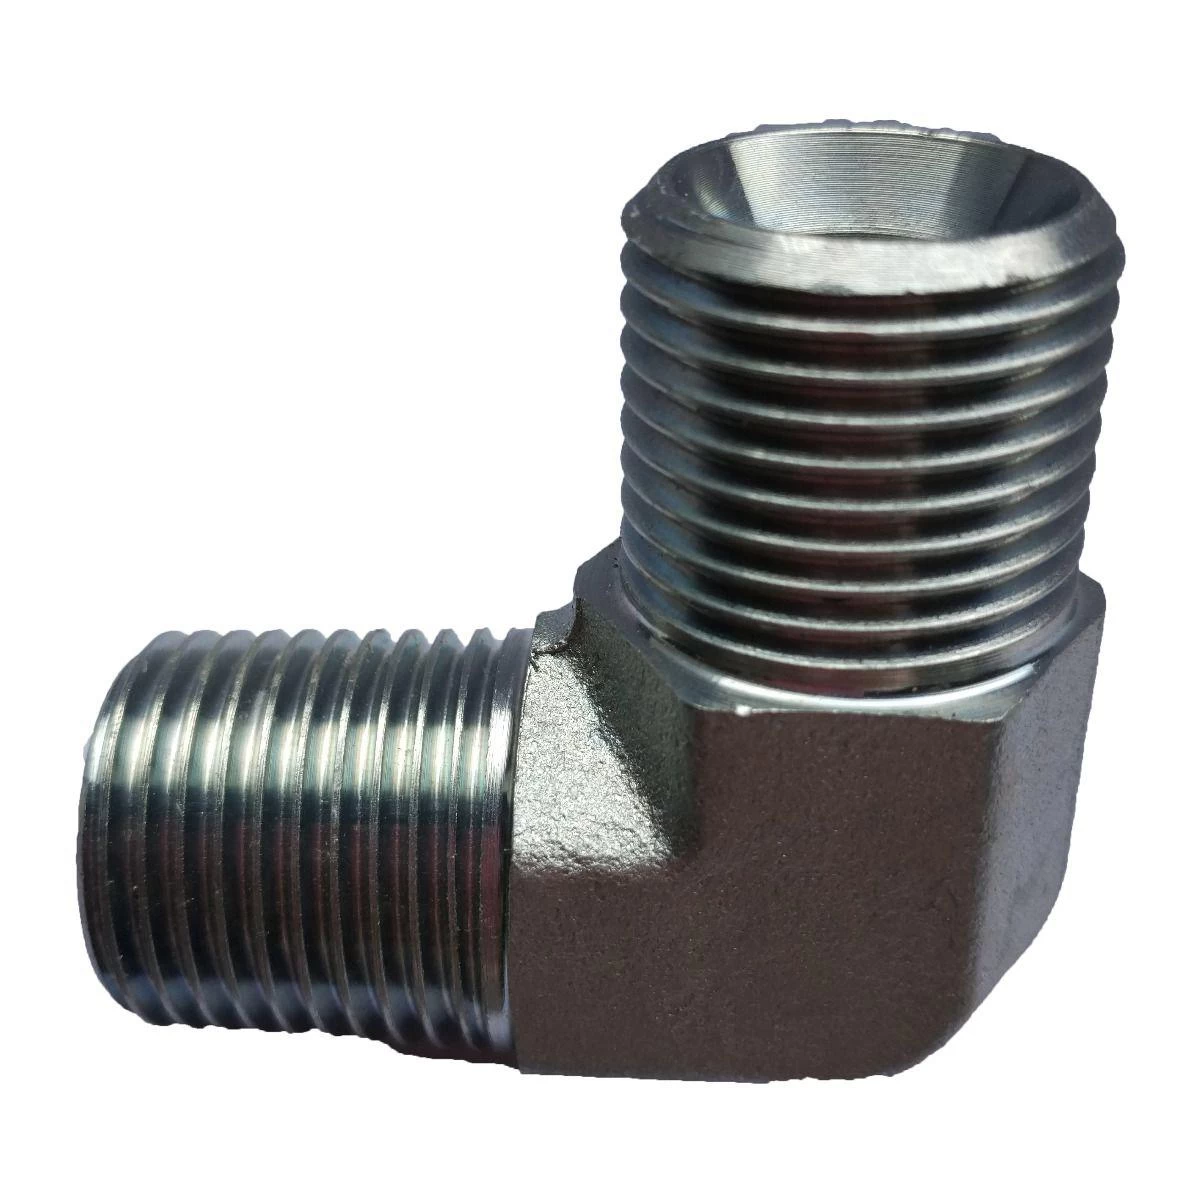 China 1BN9 tube fittings manufacturer